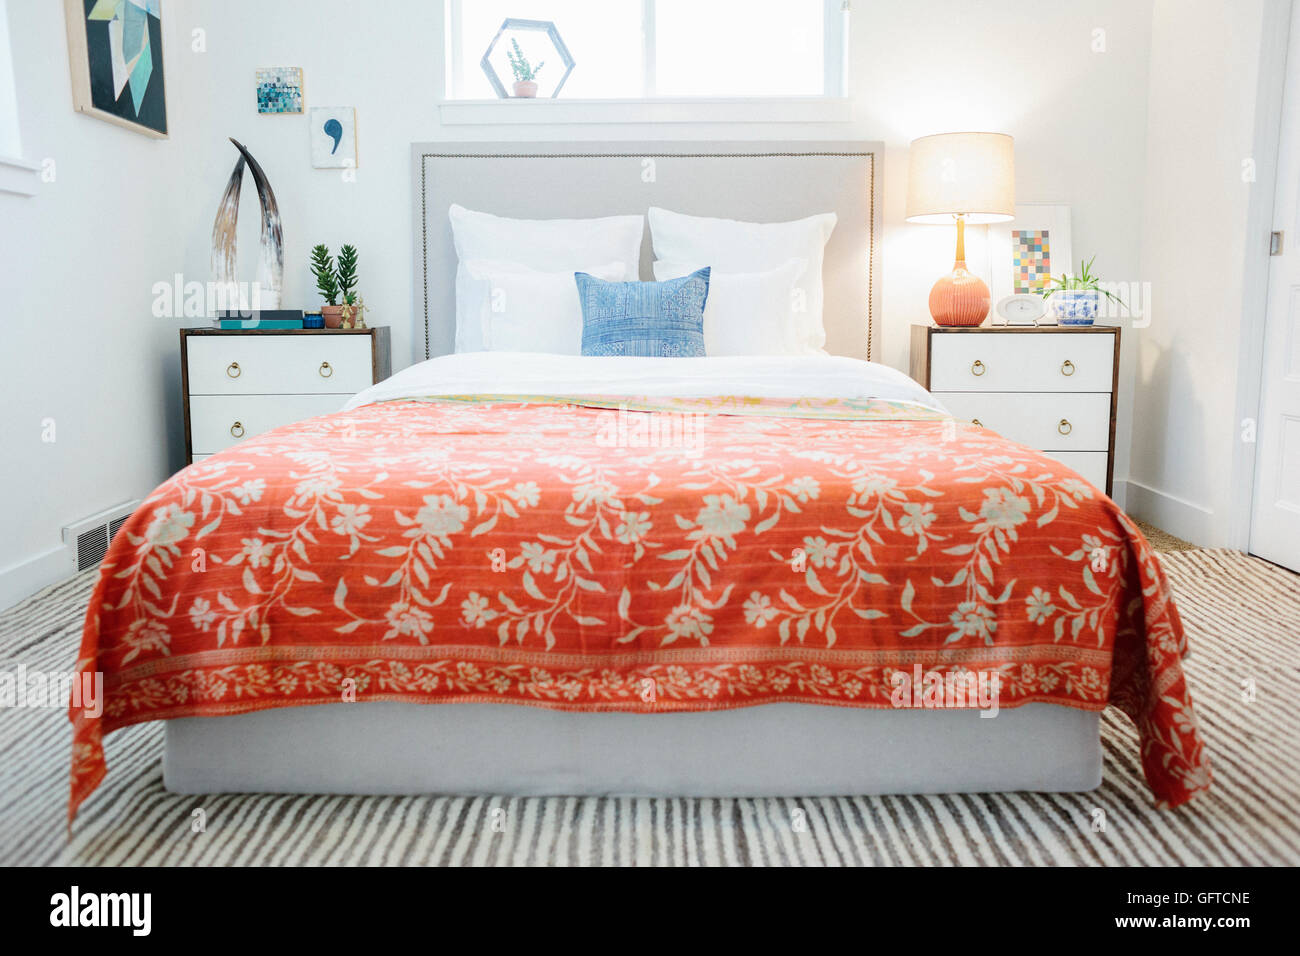 A bedroom in an apartment with a double bed and beside cabinets and a vivid russet coloured bedspread with a floral pattern Stock Photo